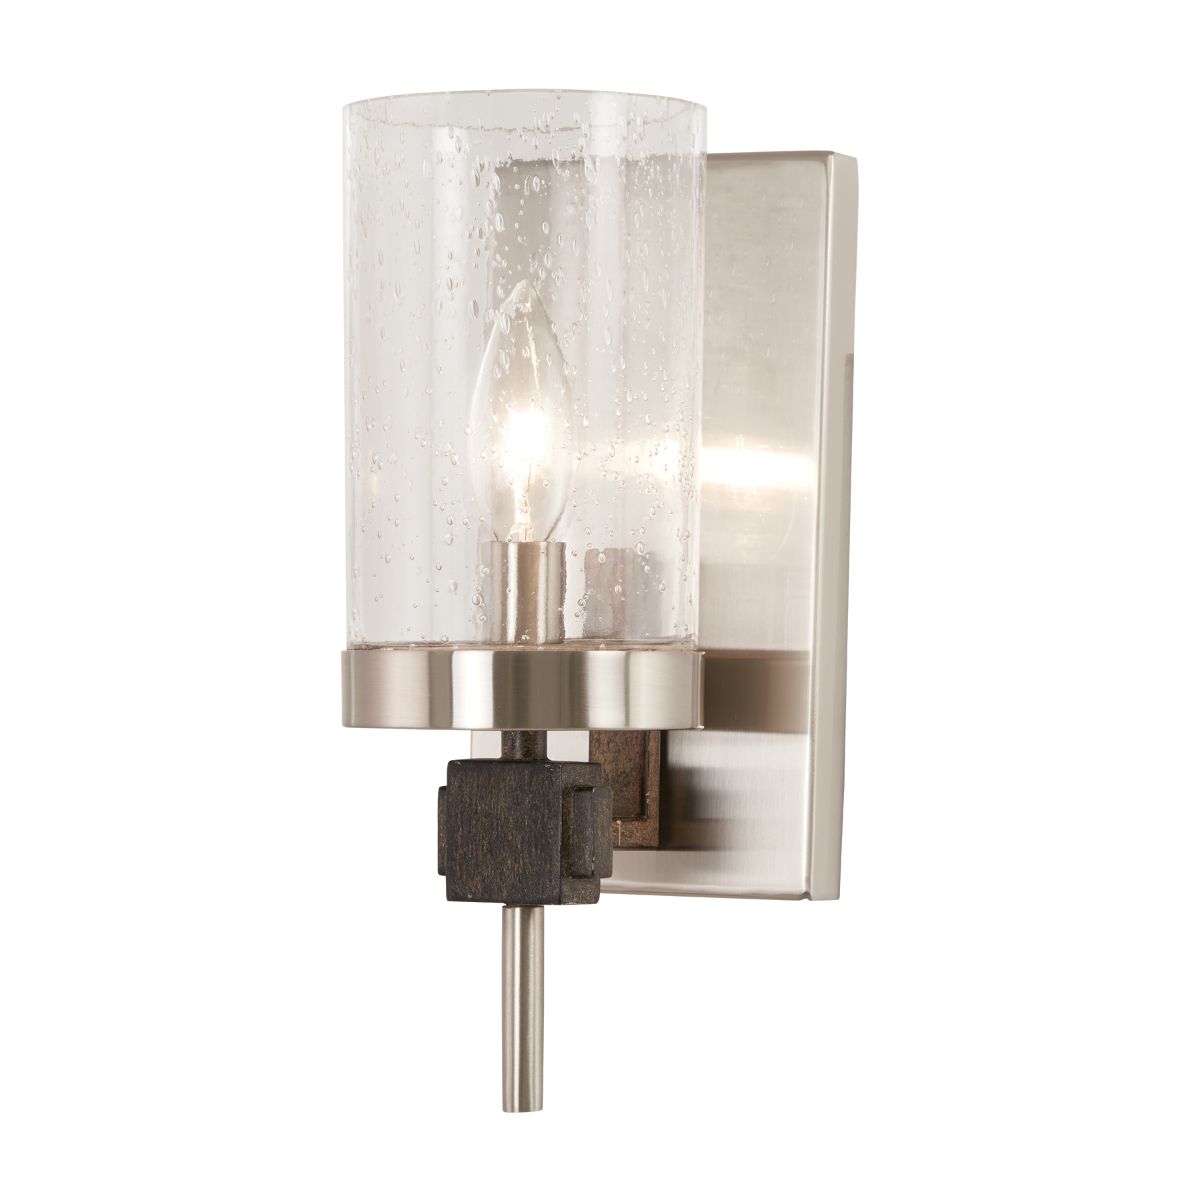 Bridlewood 11 in. Wall Sconce Brushed Nickel finish